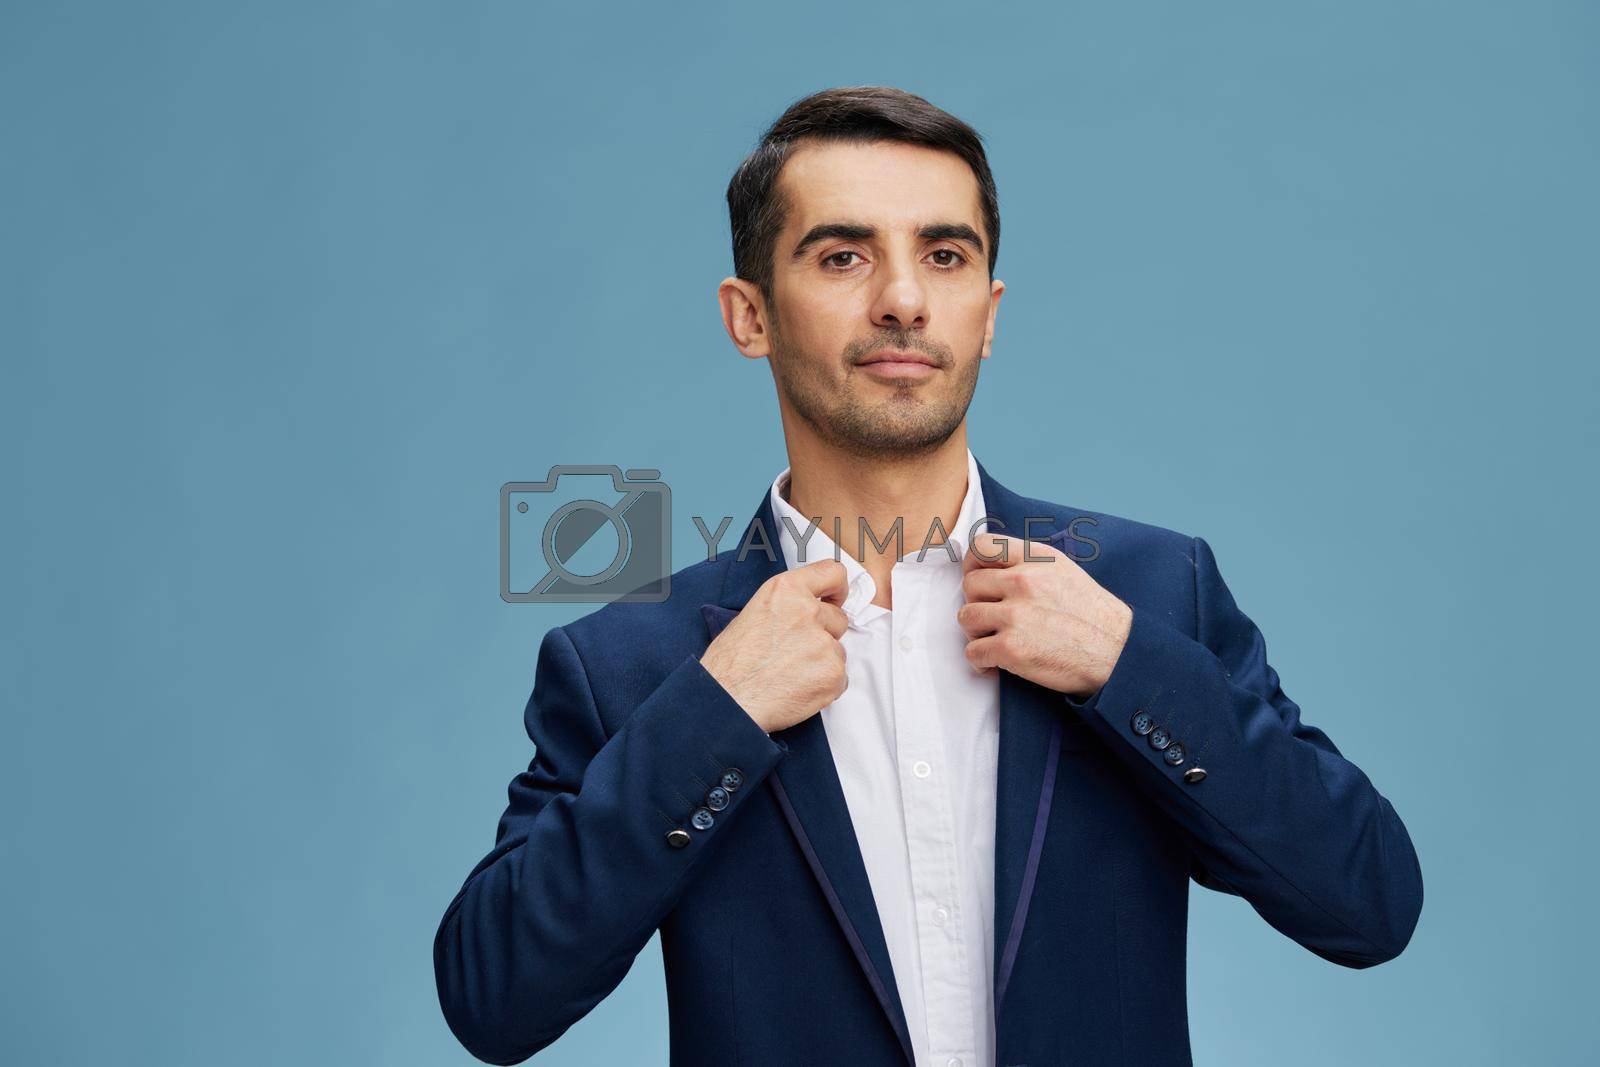 manager blue suit adjusting his jacket business and office concept. High quality photo